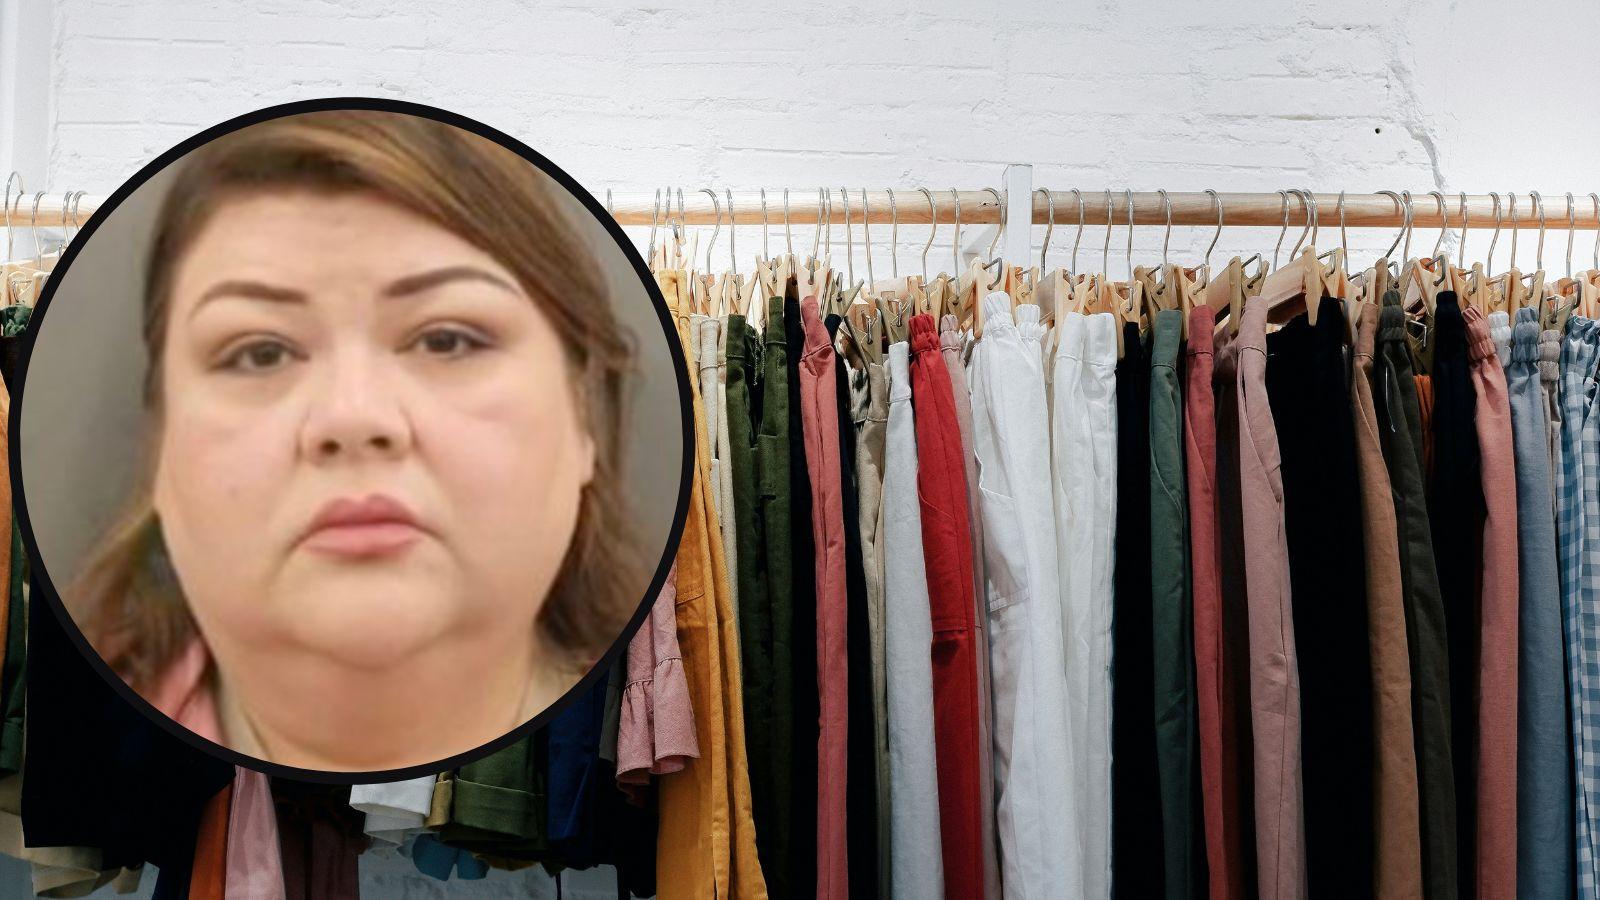 A woman has been accused of faking a TLC show to get free clothes